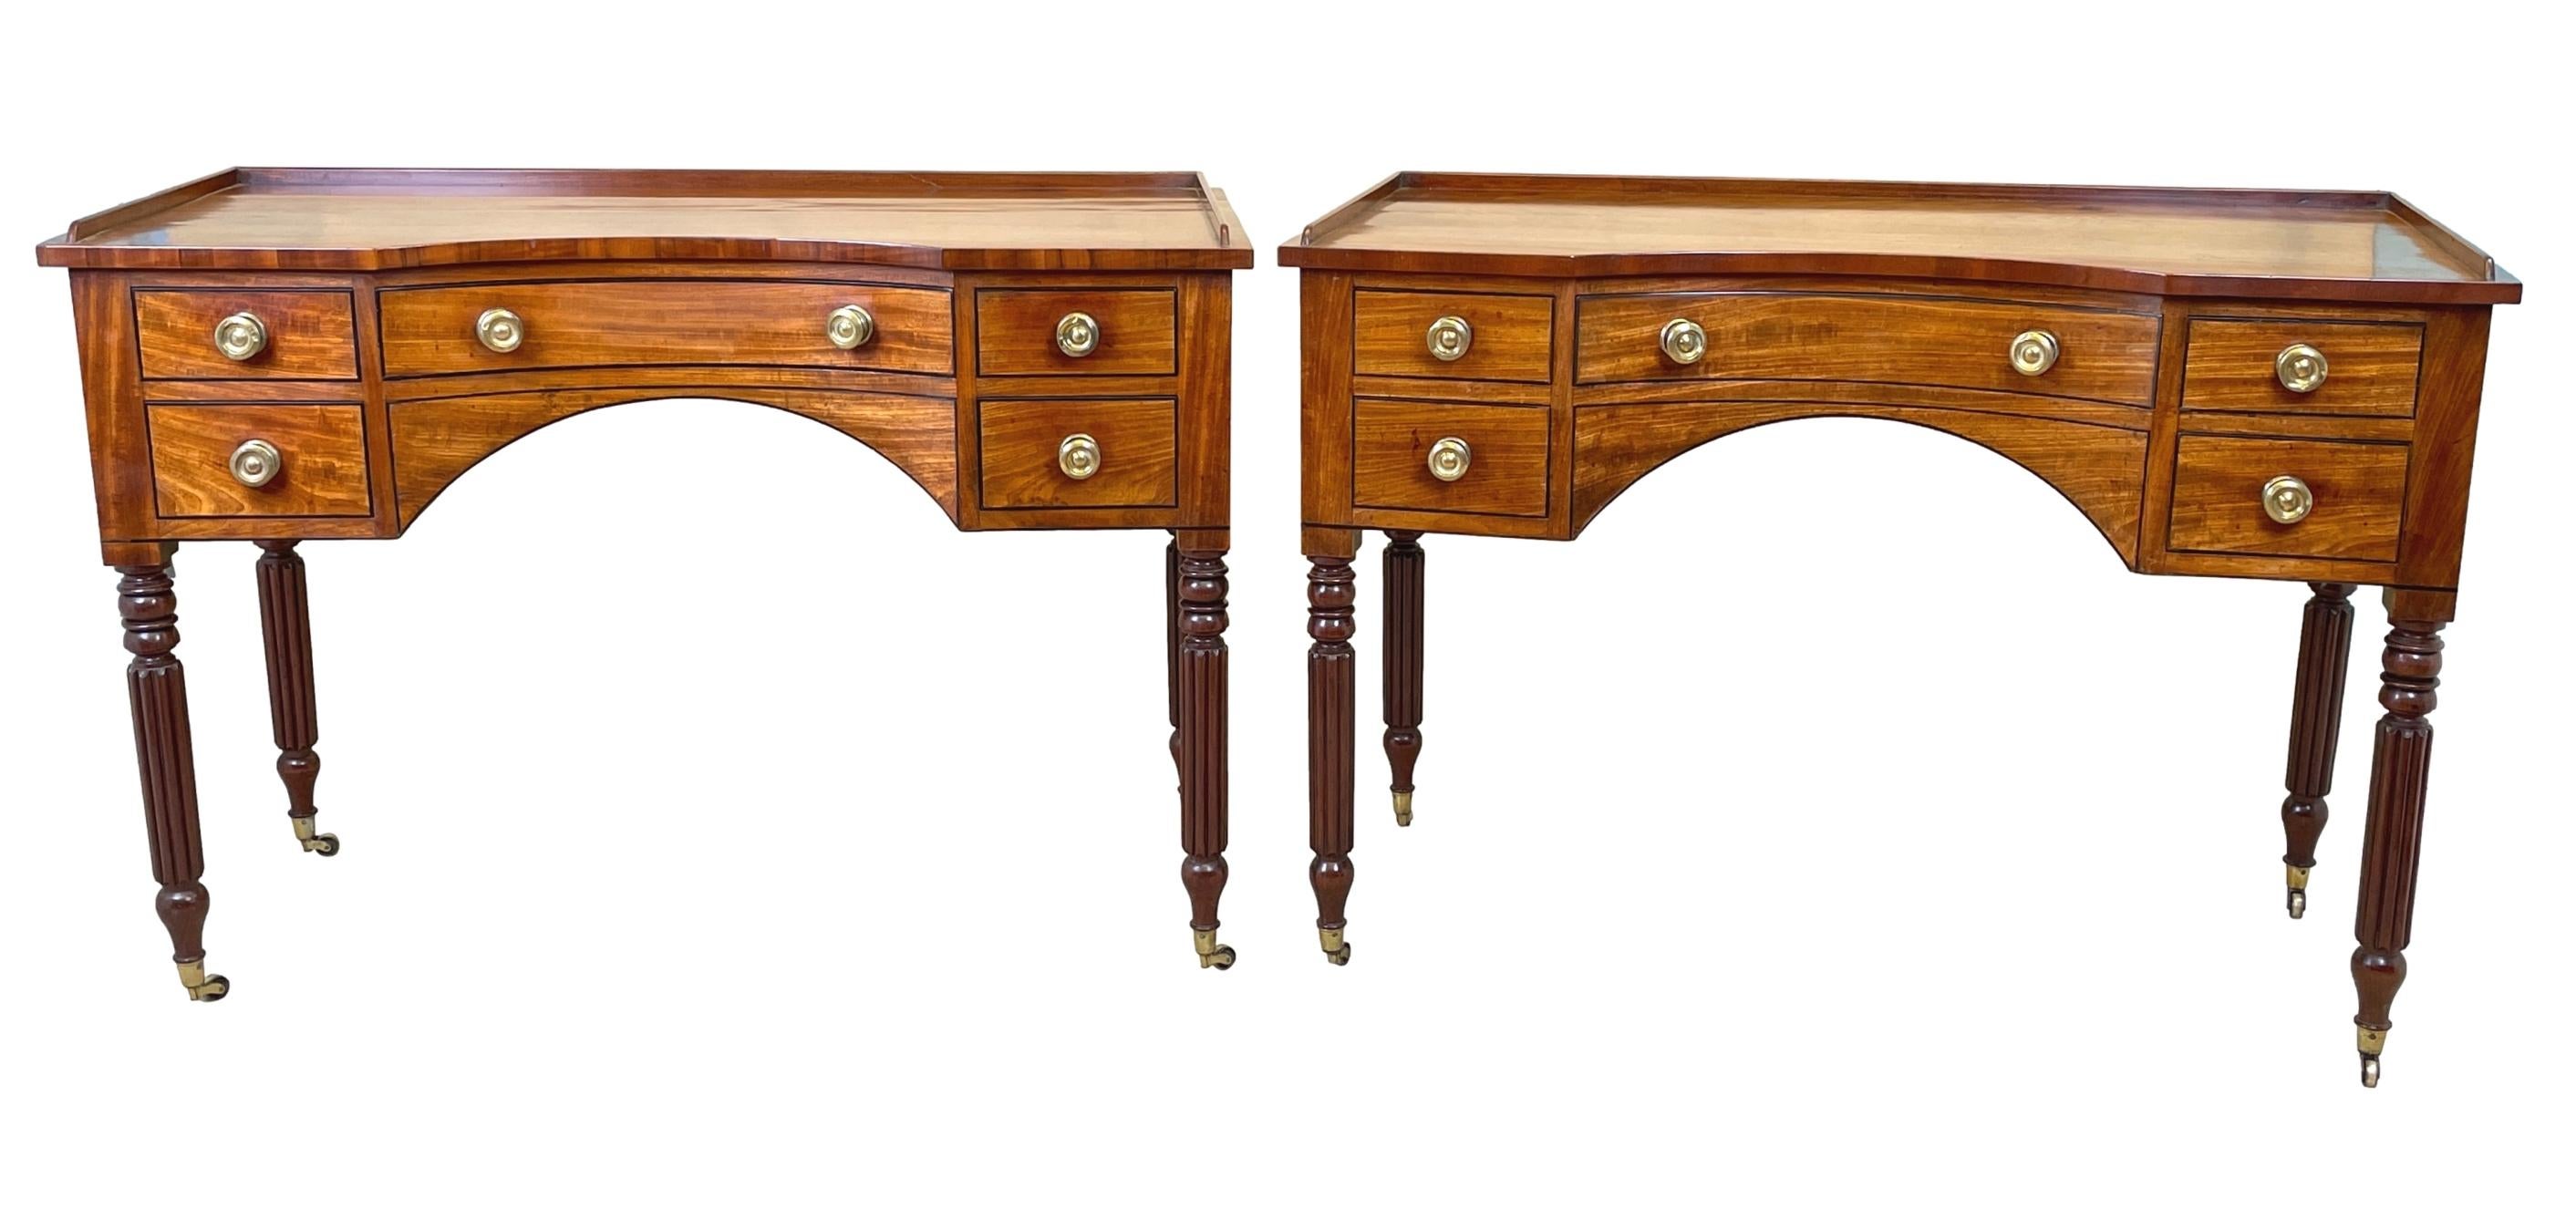 Rare Pair Of Regency Mahogany Dressing Tables For Sale 7